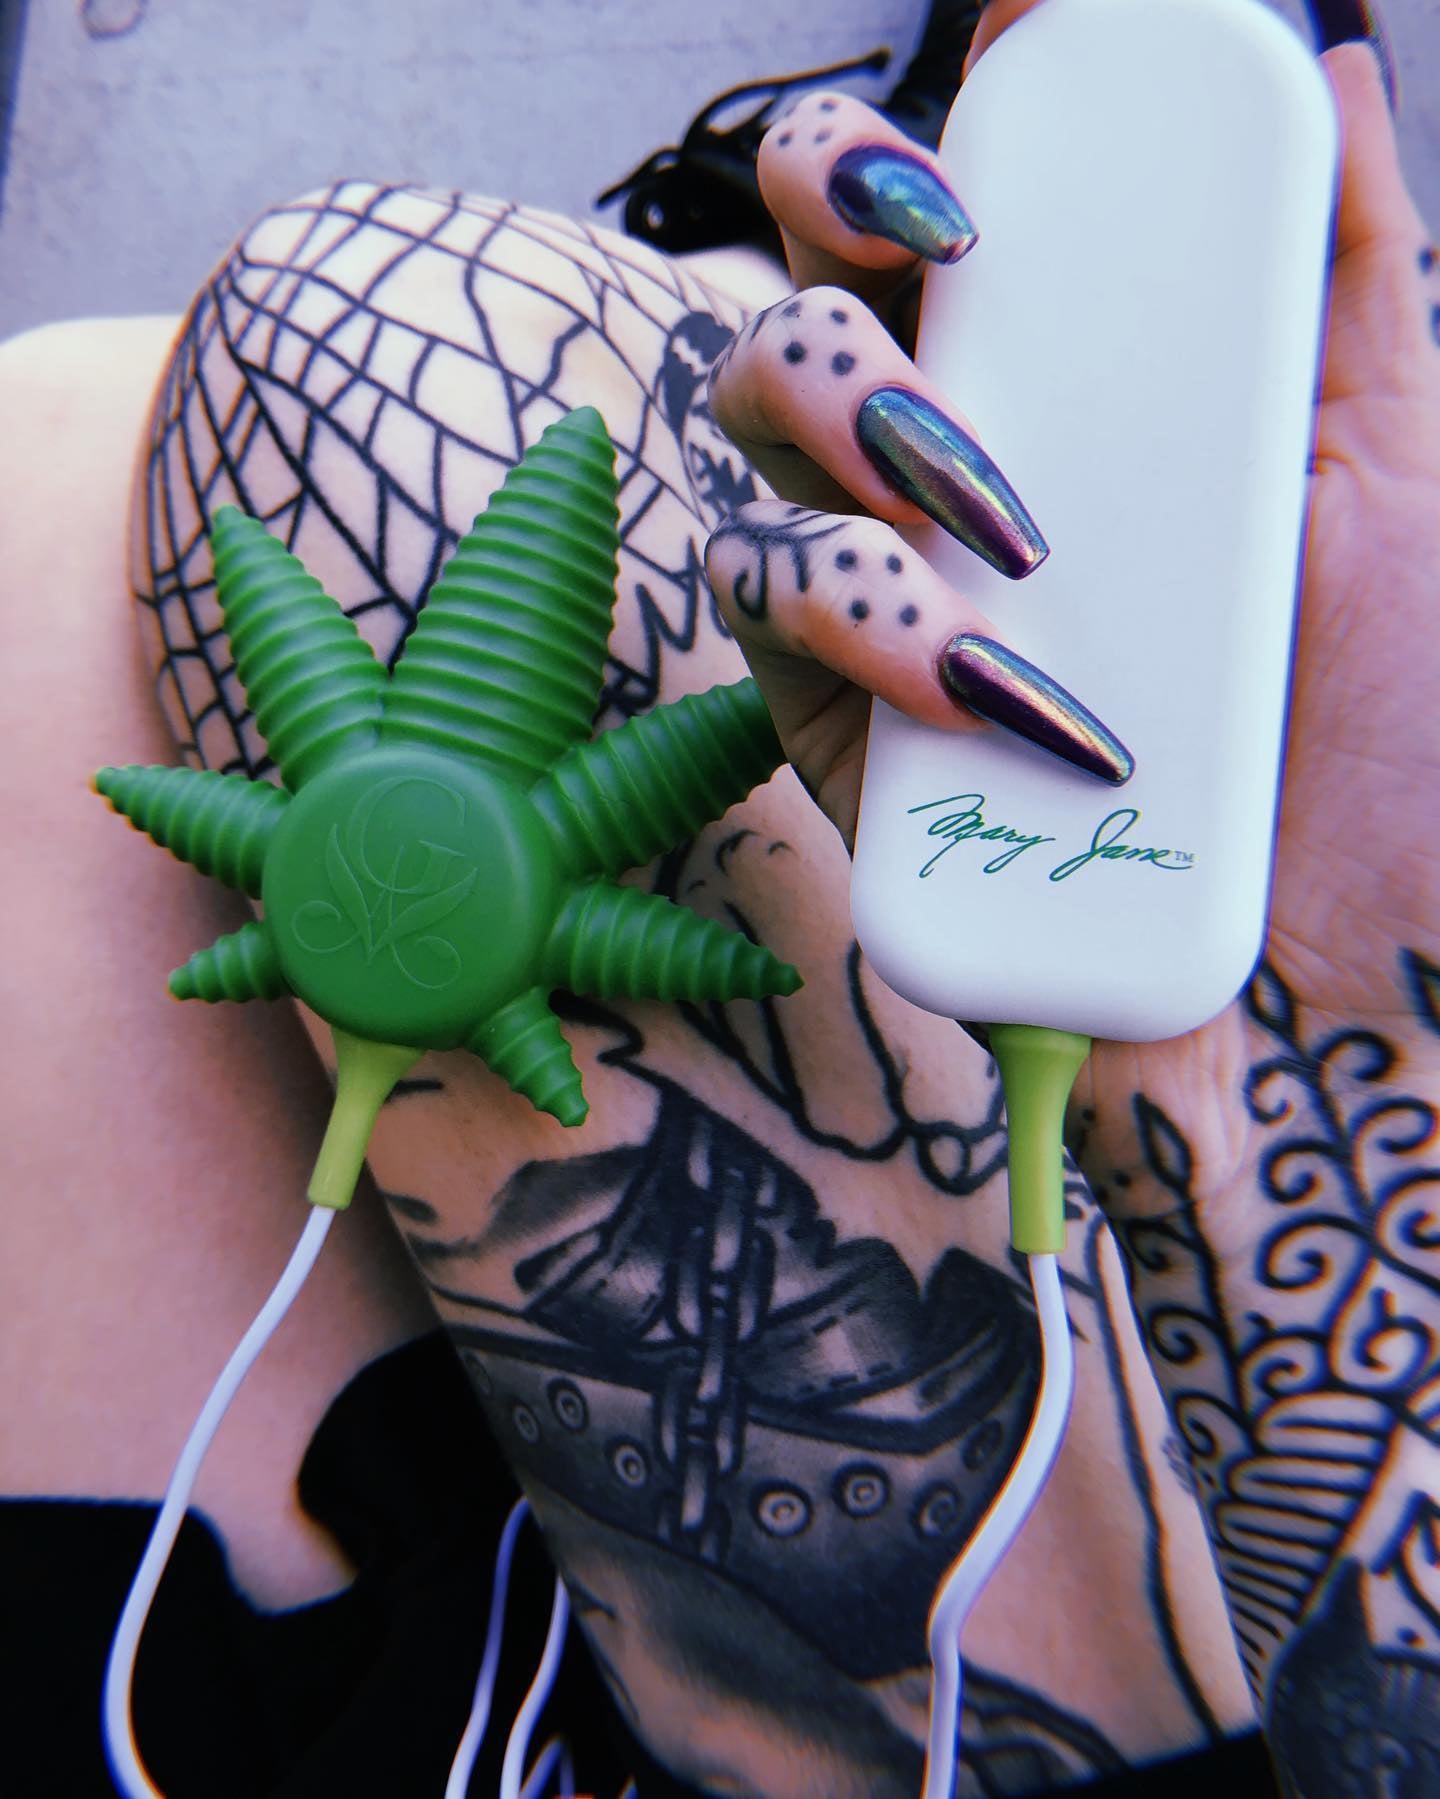 Model holding green leaf-shaped vibrator and white remote